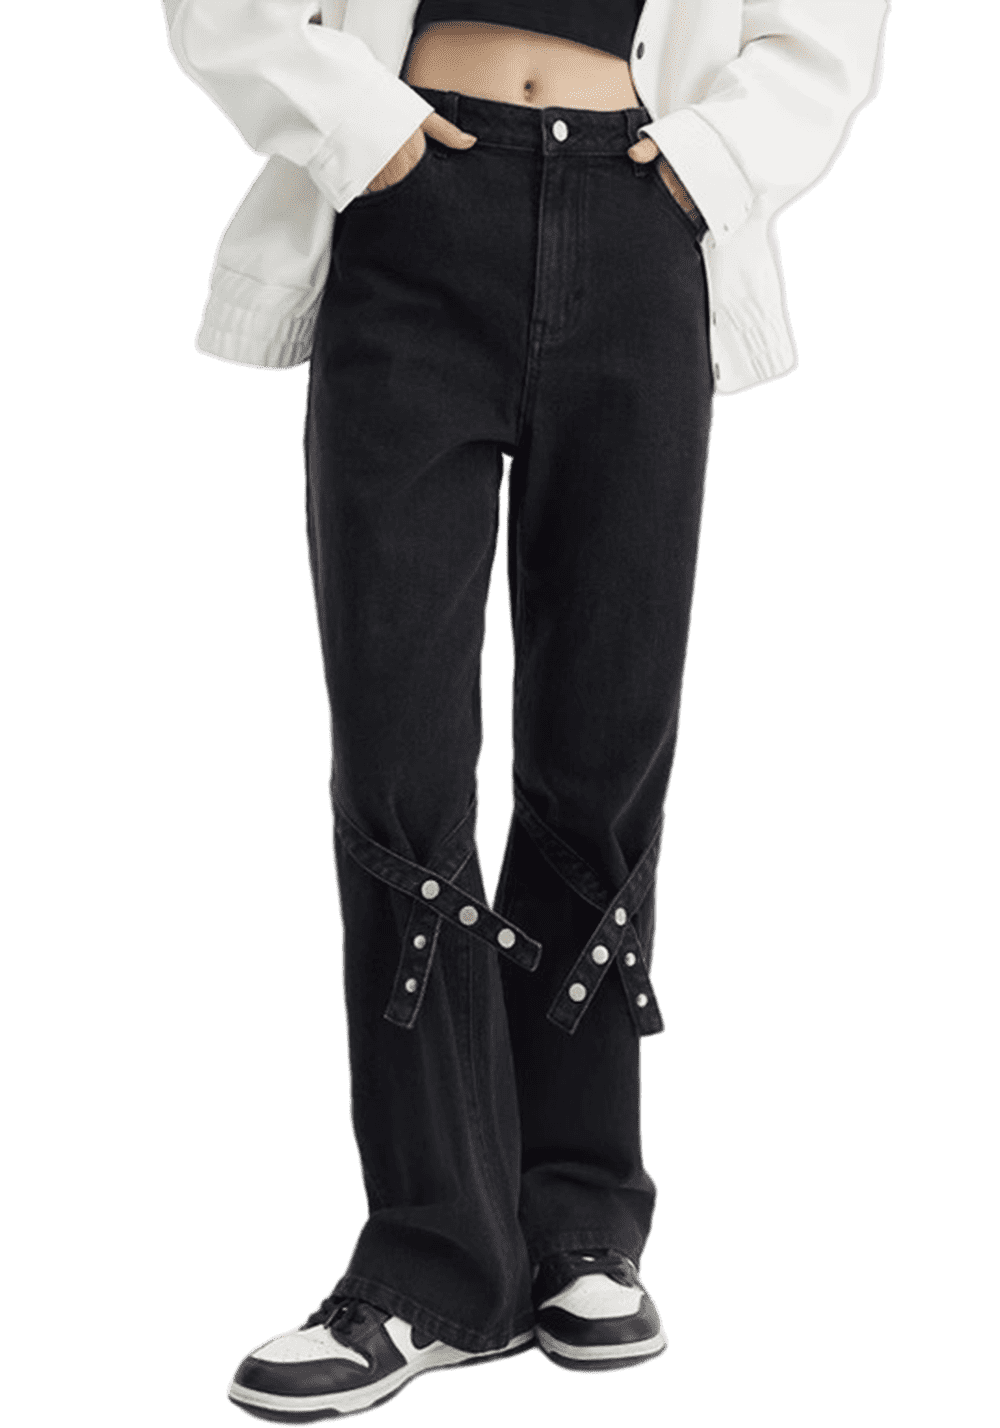 Straight High Street Lace Up Jeans - PSYLOS 1, Straight High Street Lace Up Jeans, Pants, iconslab, PSYLOS 1